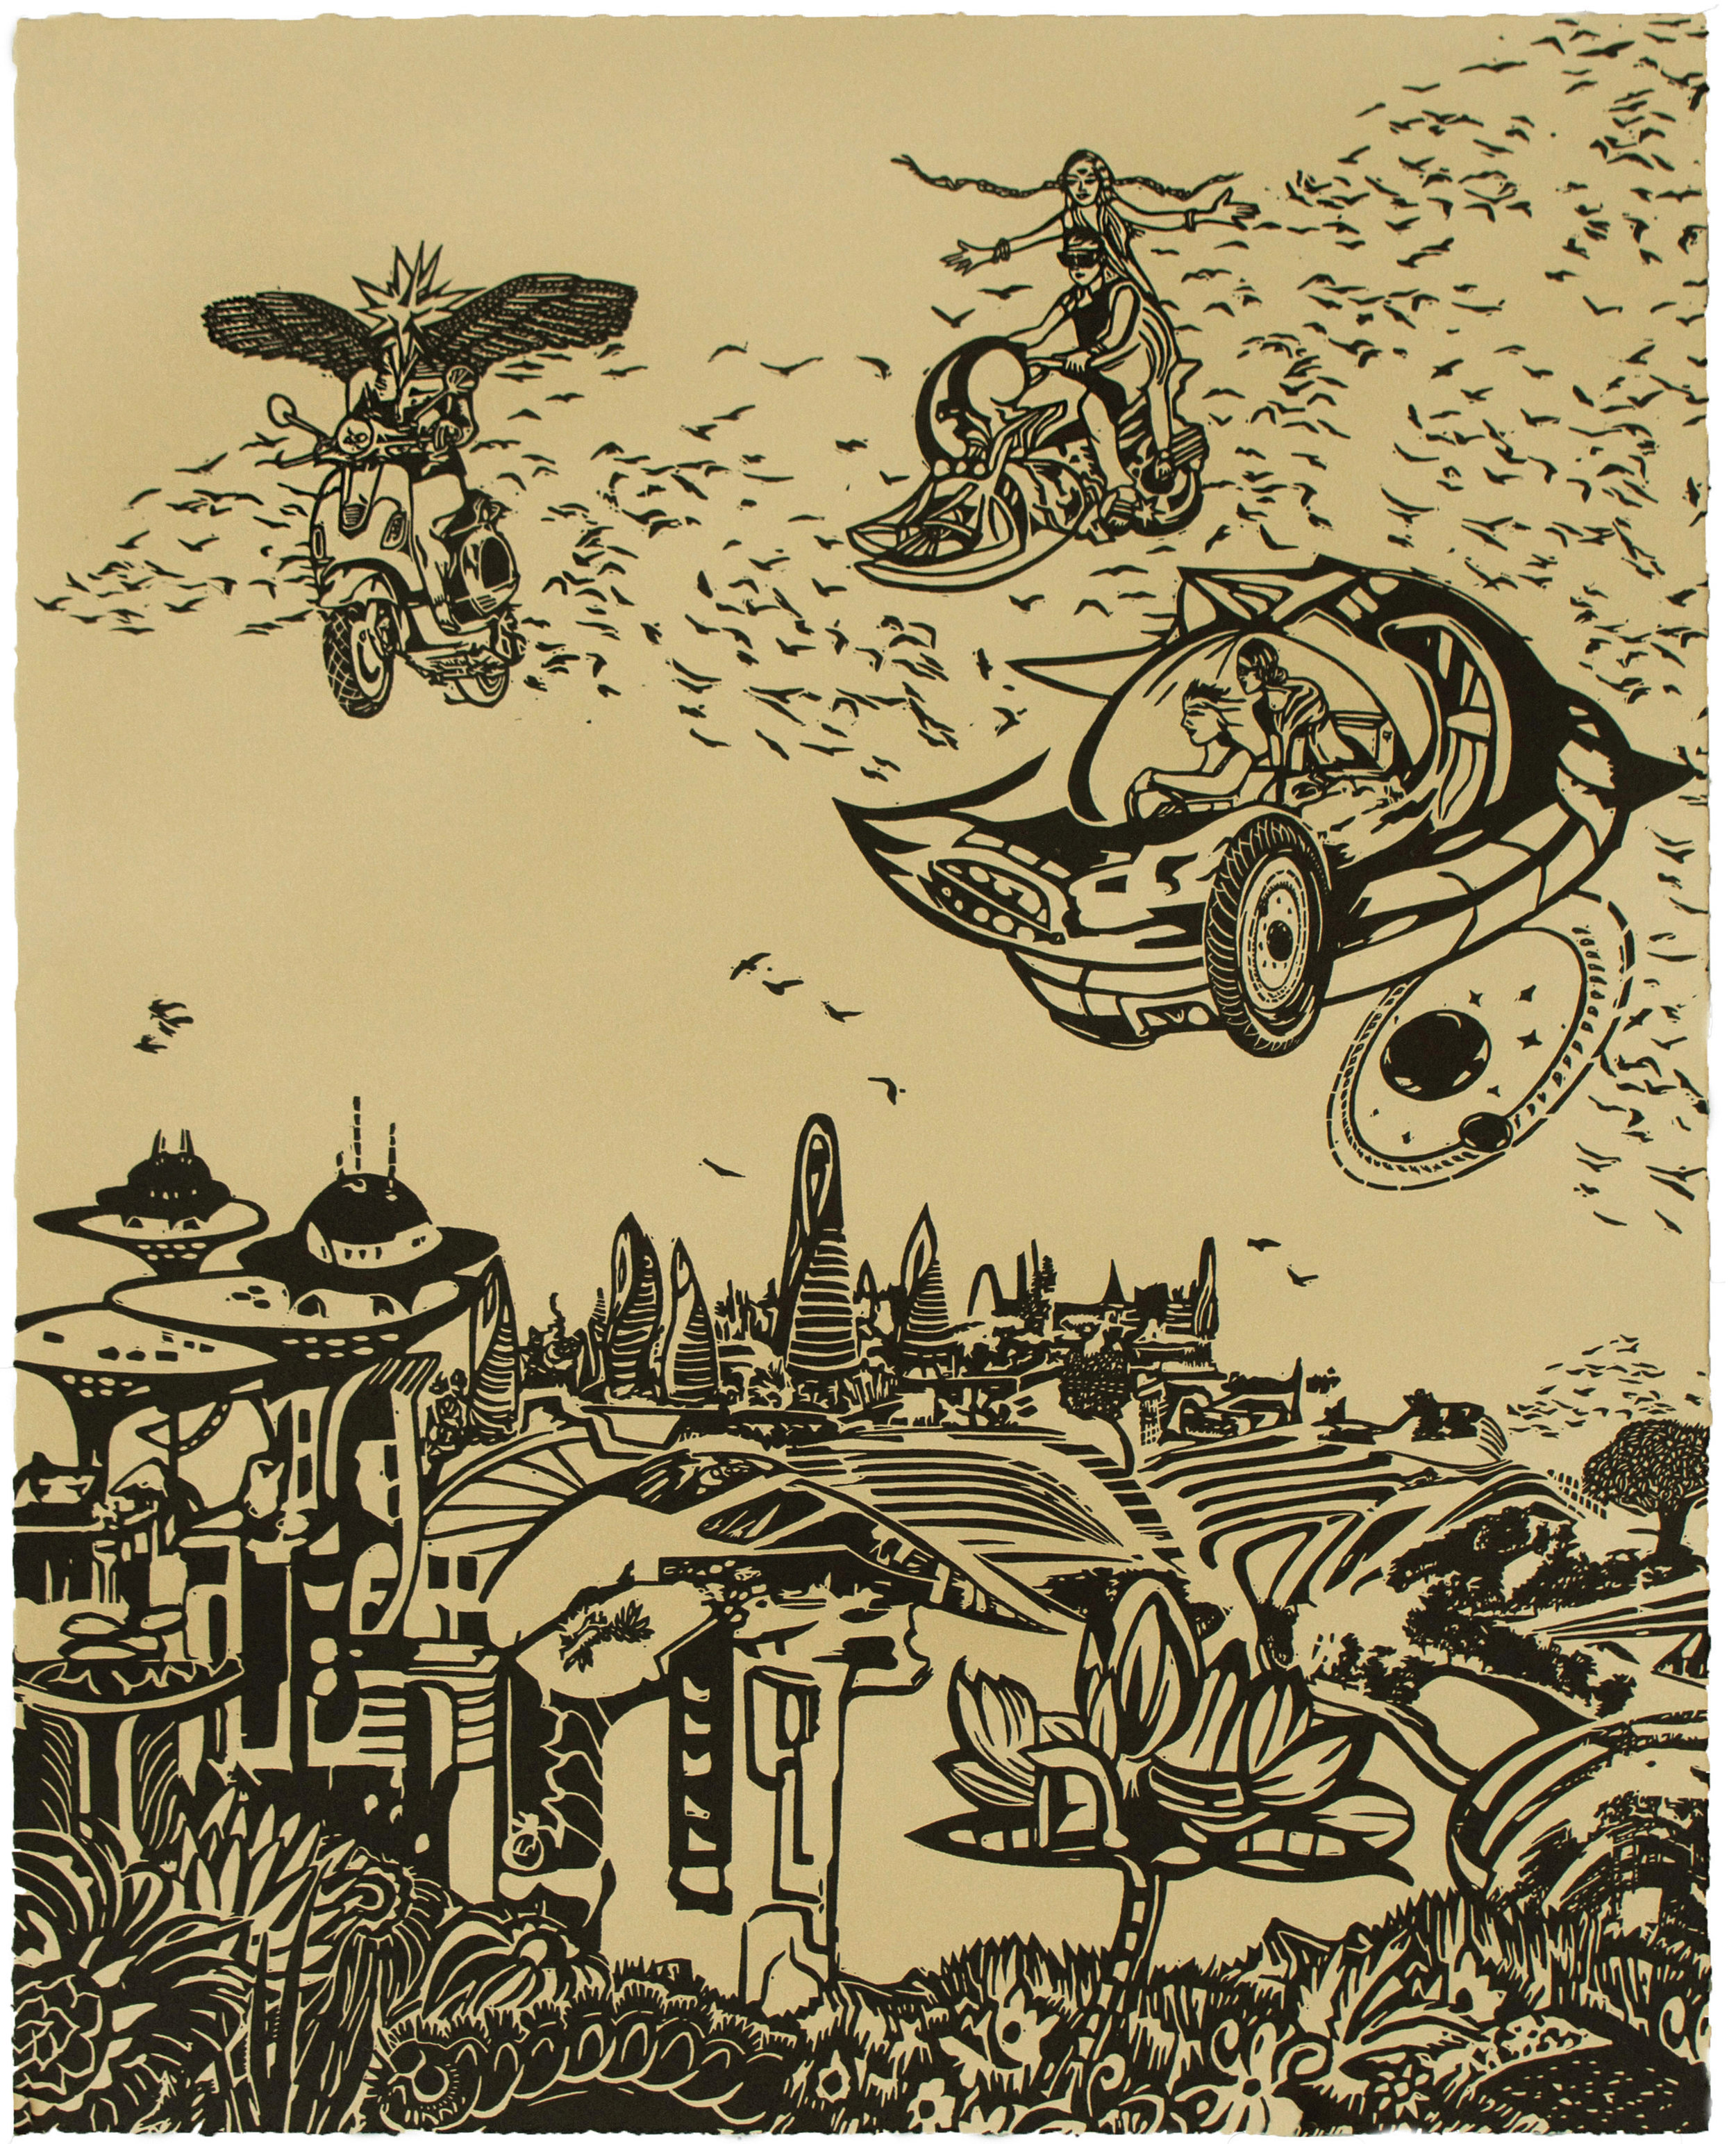  Chitra Ganesh,  Over the City , 2018, Linocut BFK Rives Tan, 280gsm, Edition of 35, 20 1/ 8 x 16 1/8 inches (51.1 x 41 cm) 